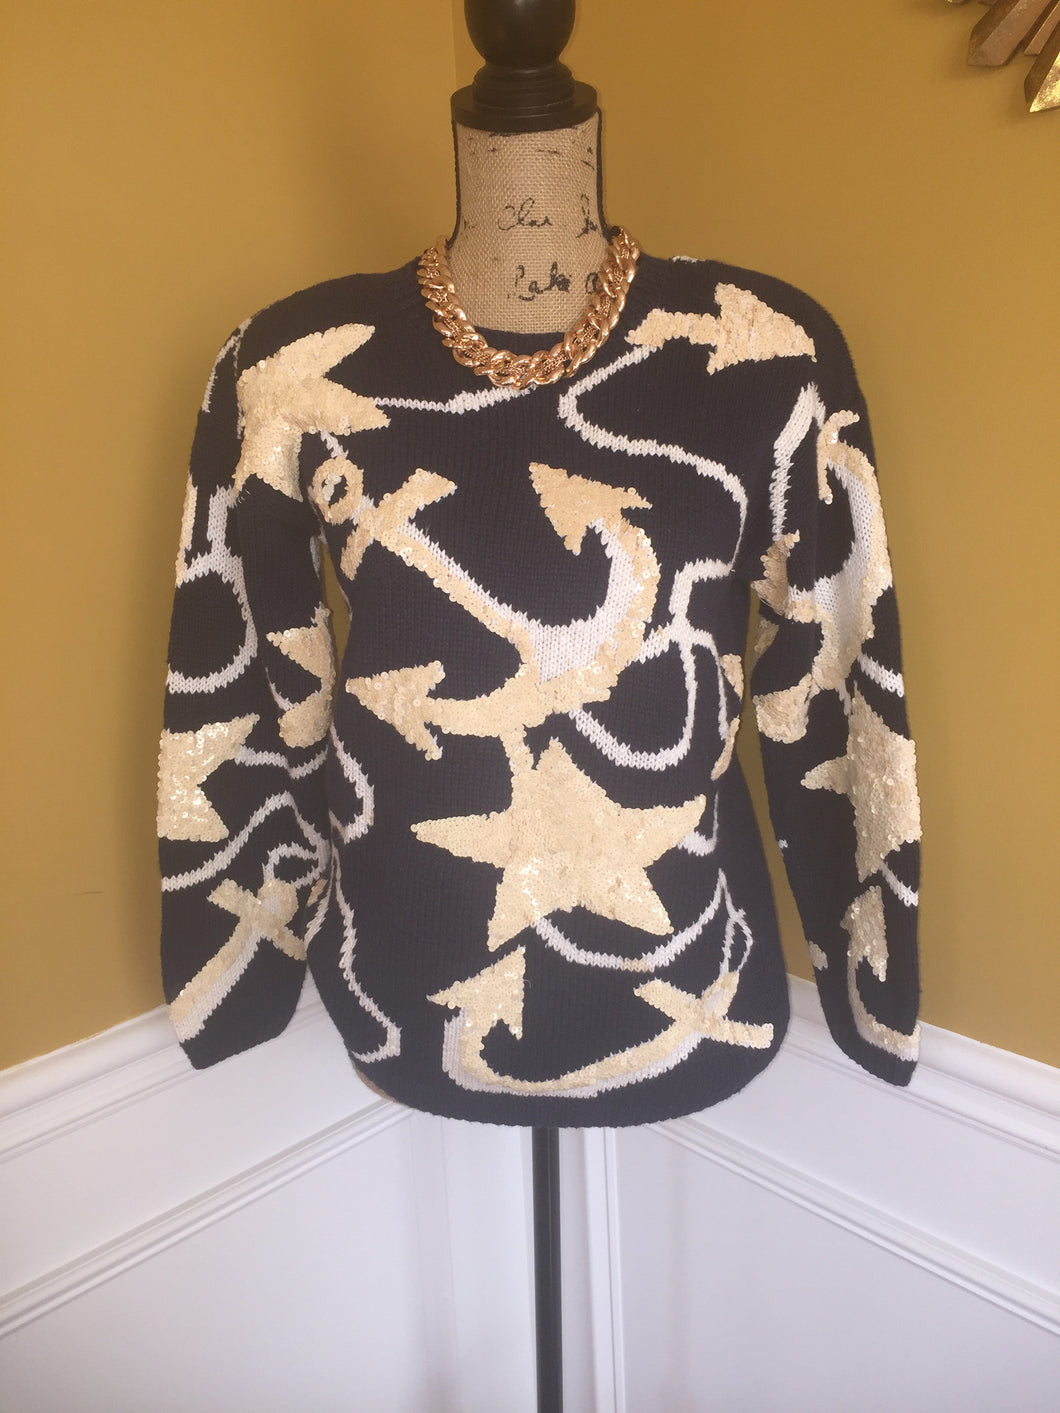 Nautical Sequined Sweater - Fits up to a Medium